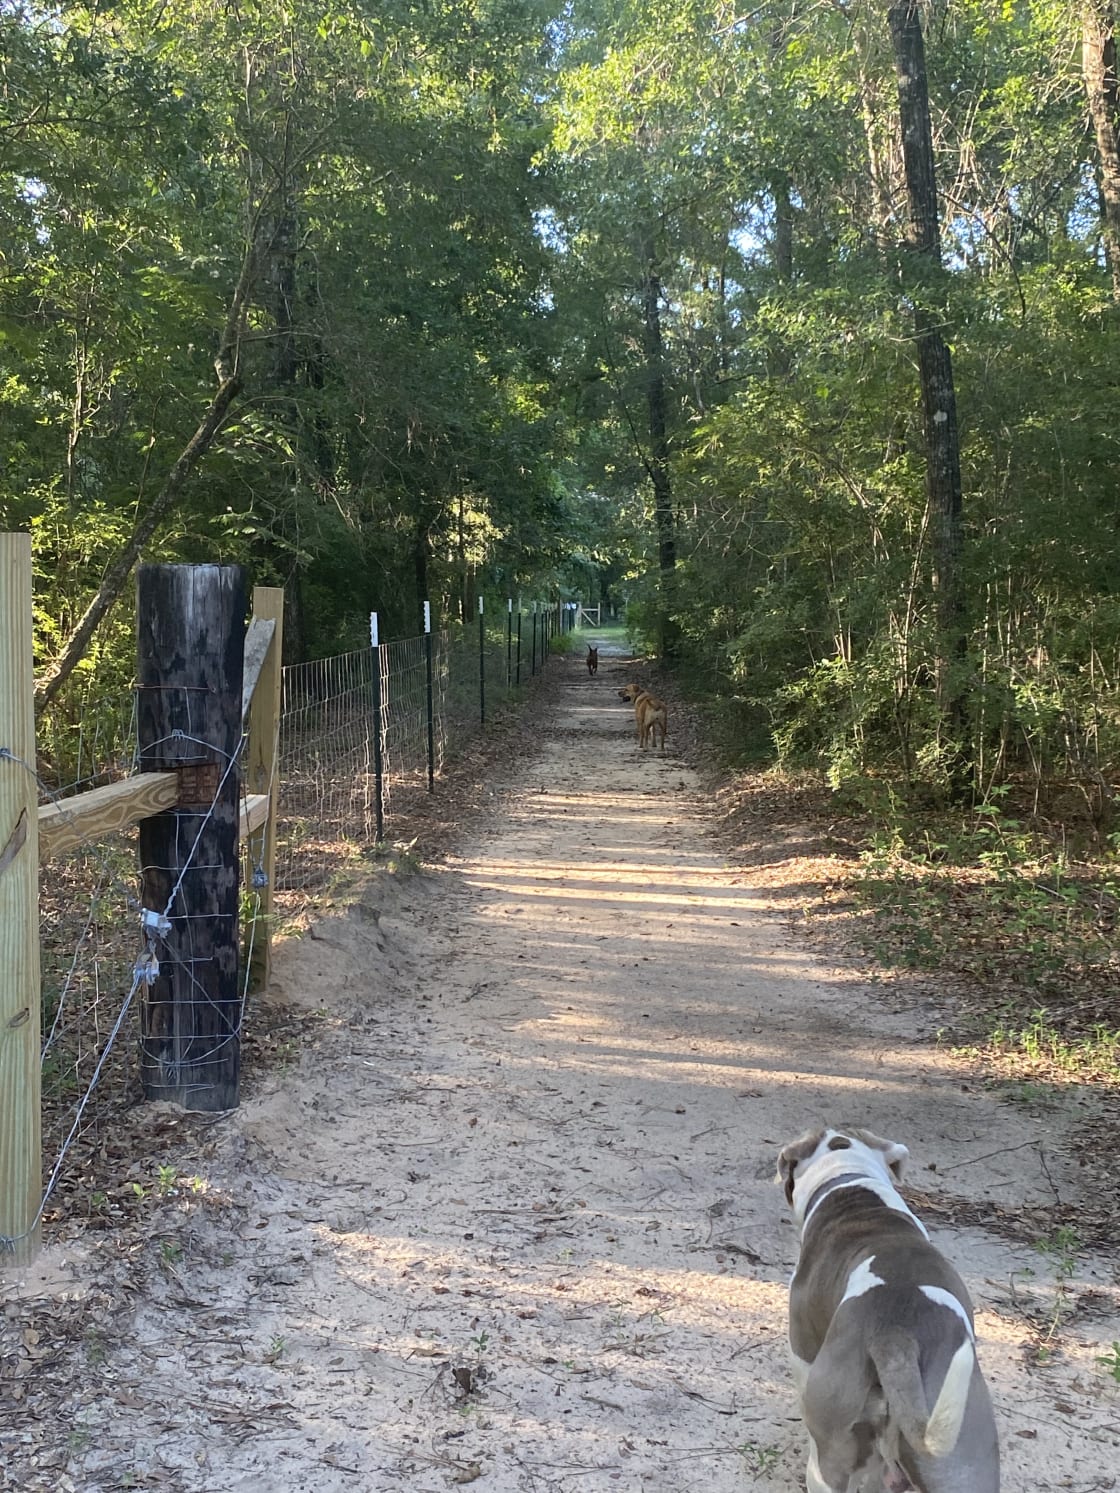 Property is 100% fenced.  Do watch your pup (leash preferred).  Ours always finding high spots in the fence to allow them an occasional freedom run! 